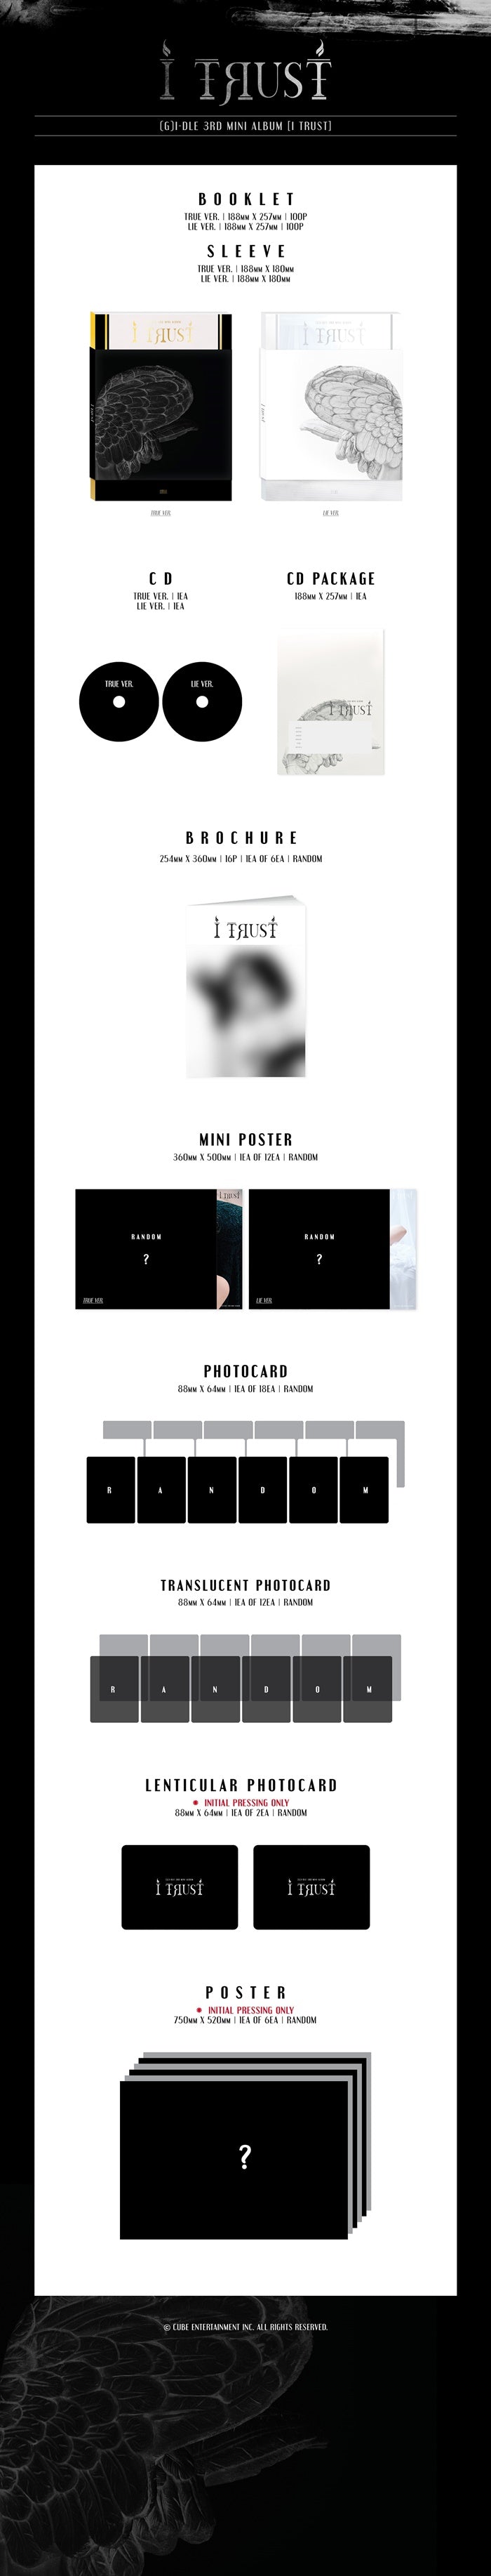 1 CD
1 Brochure (16 pages)
1 Mini Poster (random out of 12 types)
1 Photo Card (random out of 18 types)